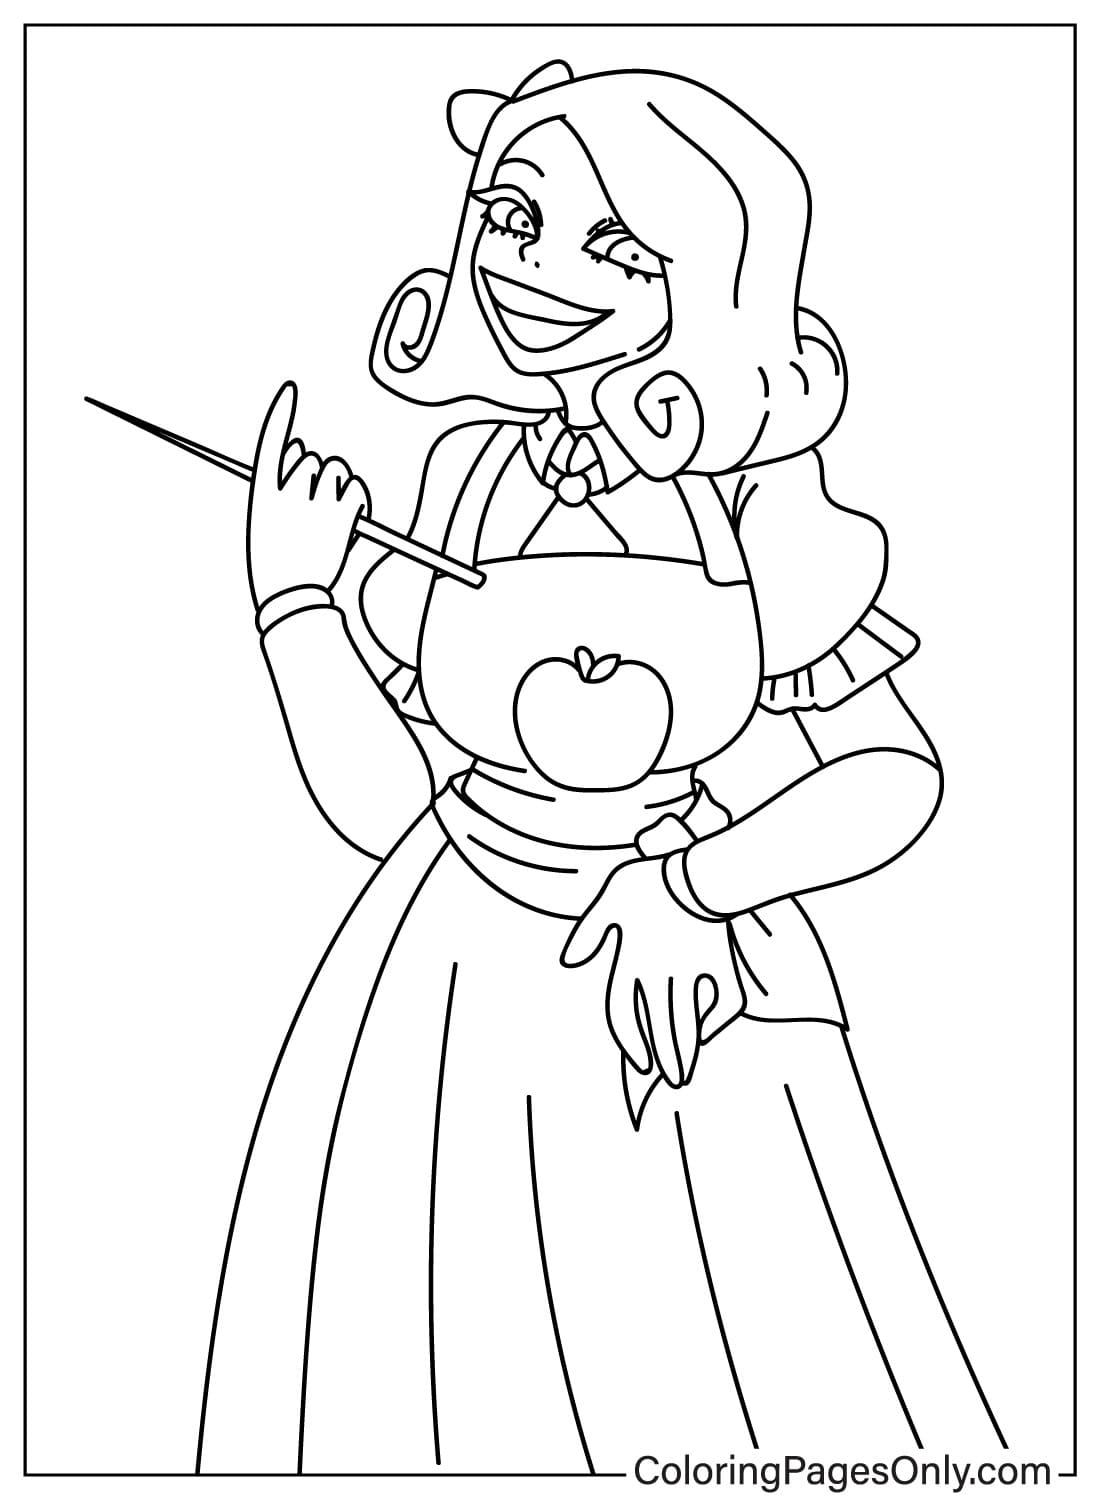 Miss Delight Coloring Page to Print from Miss Delight